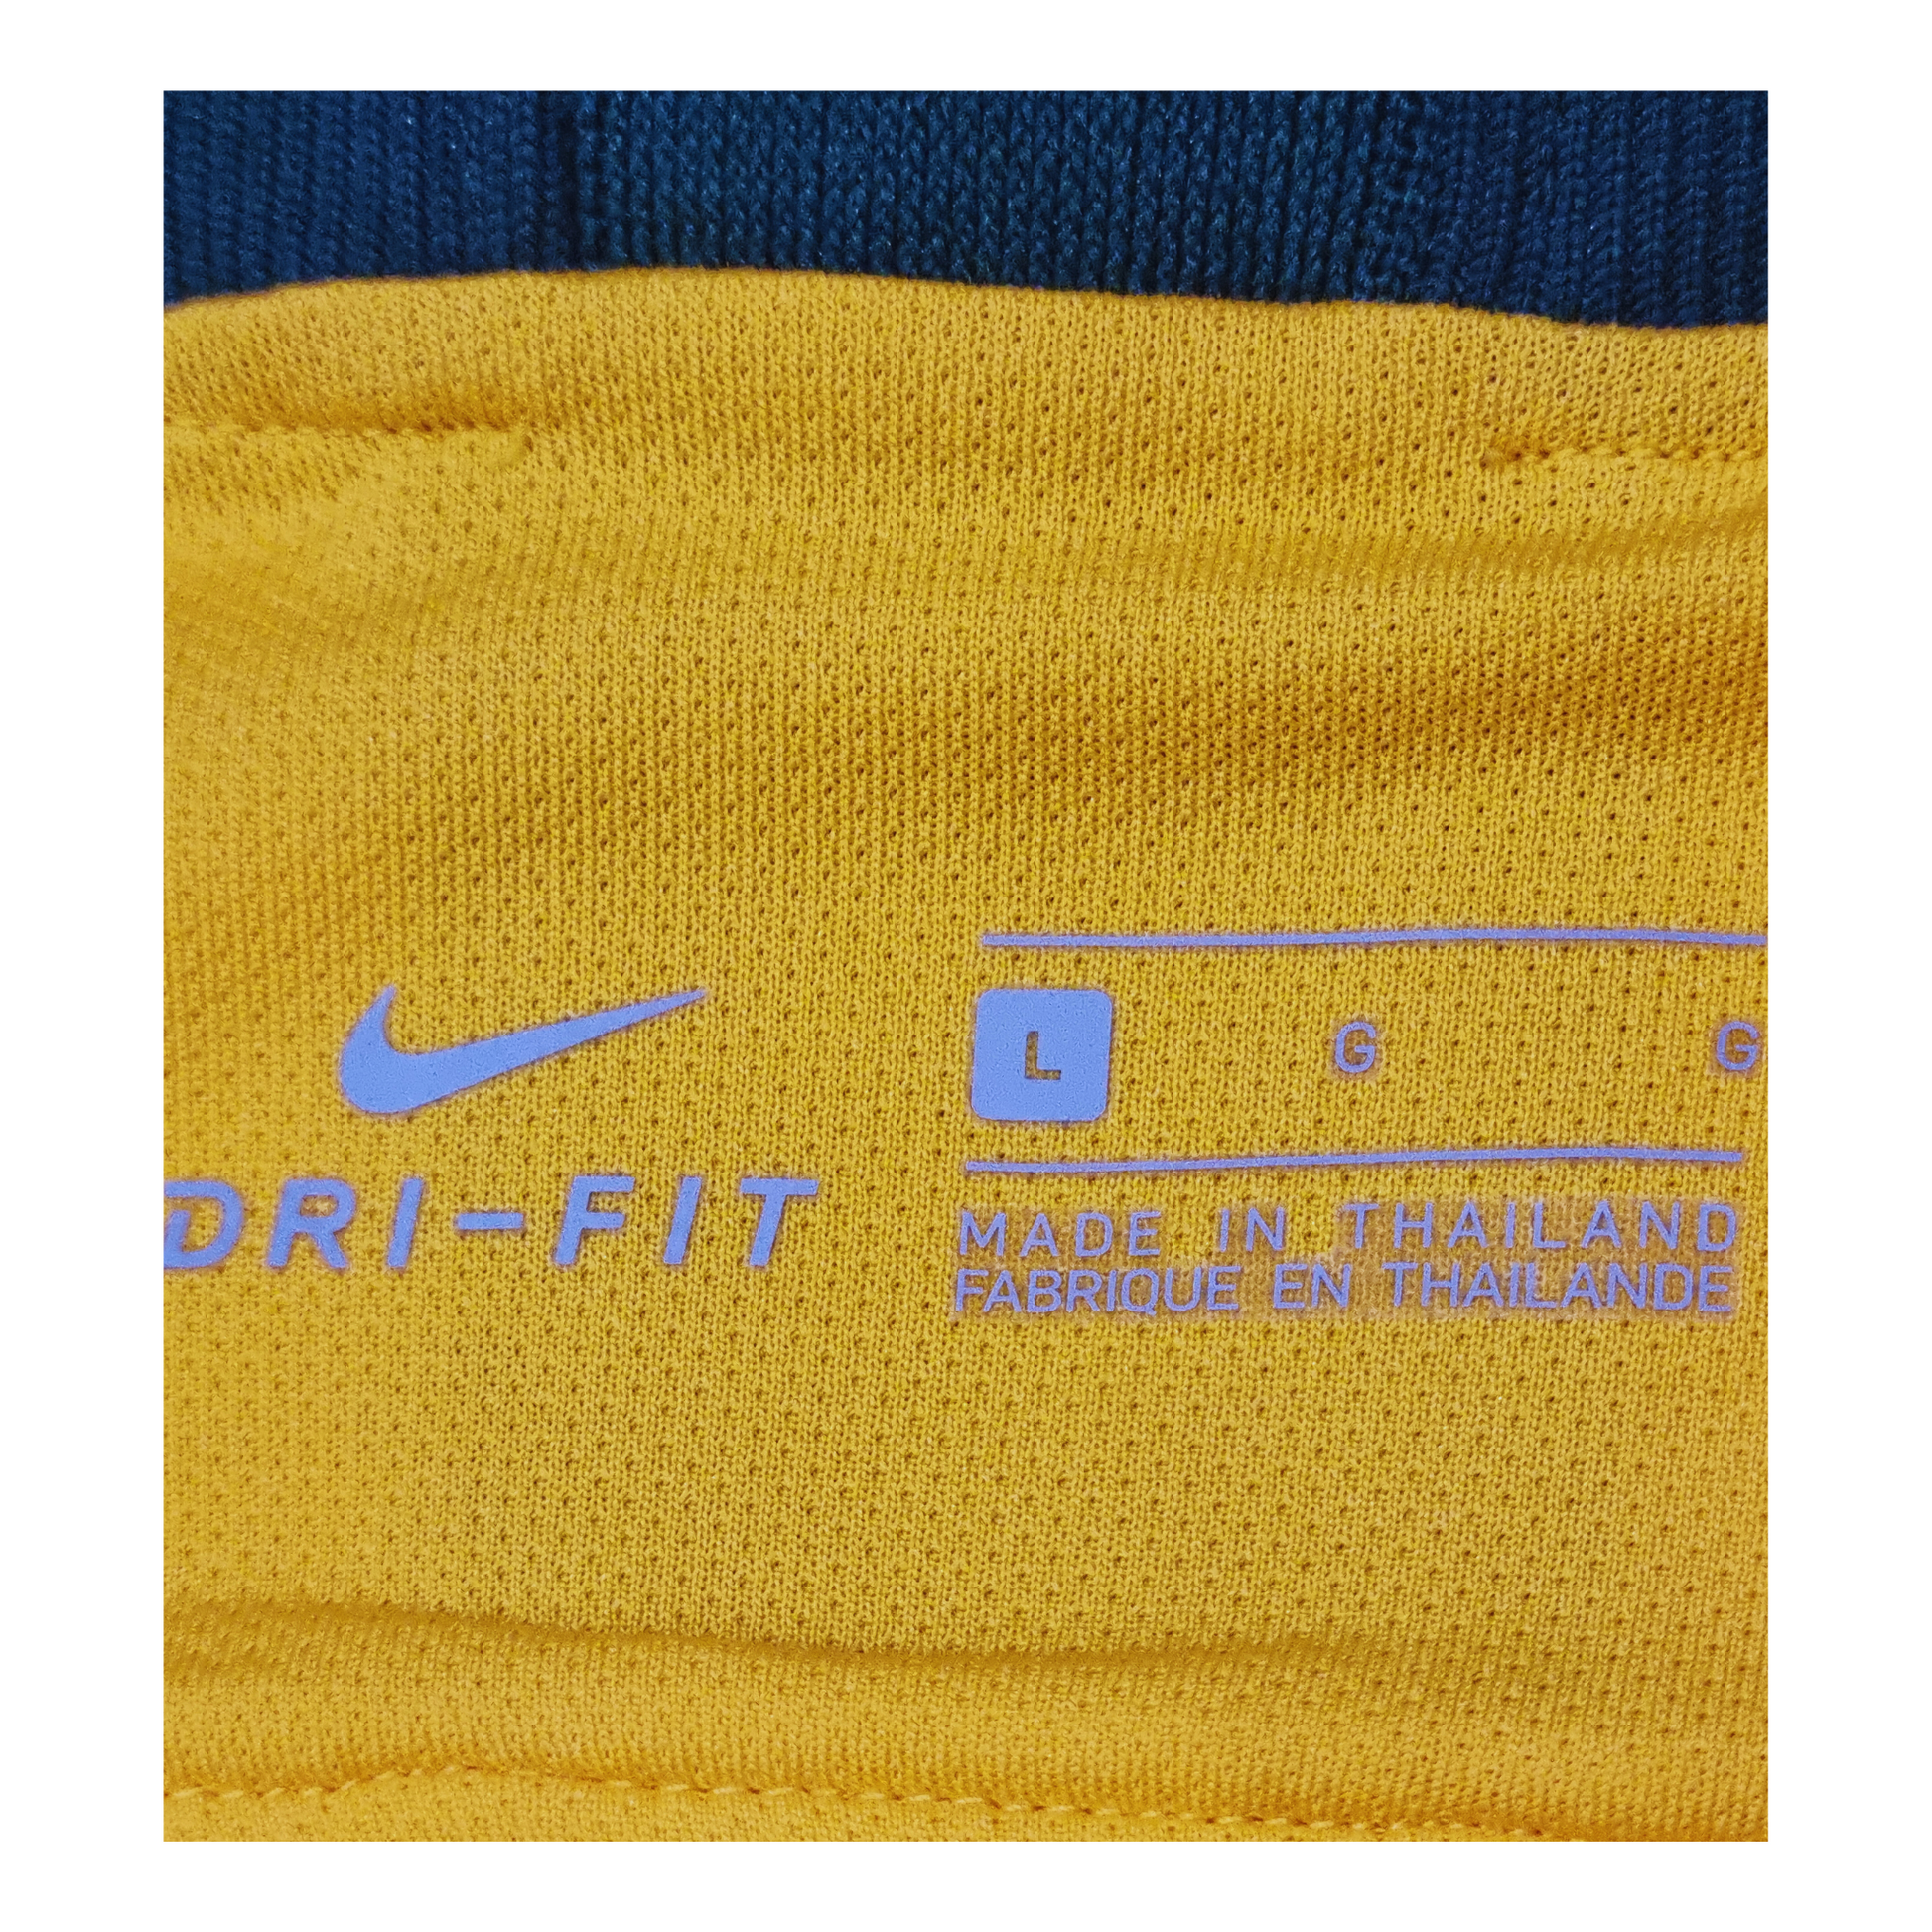 Australia 2018 Home Jersey by Nike - yellow/blue.